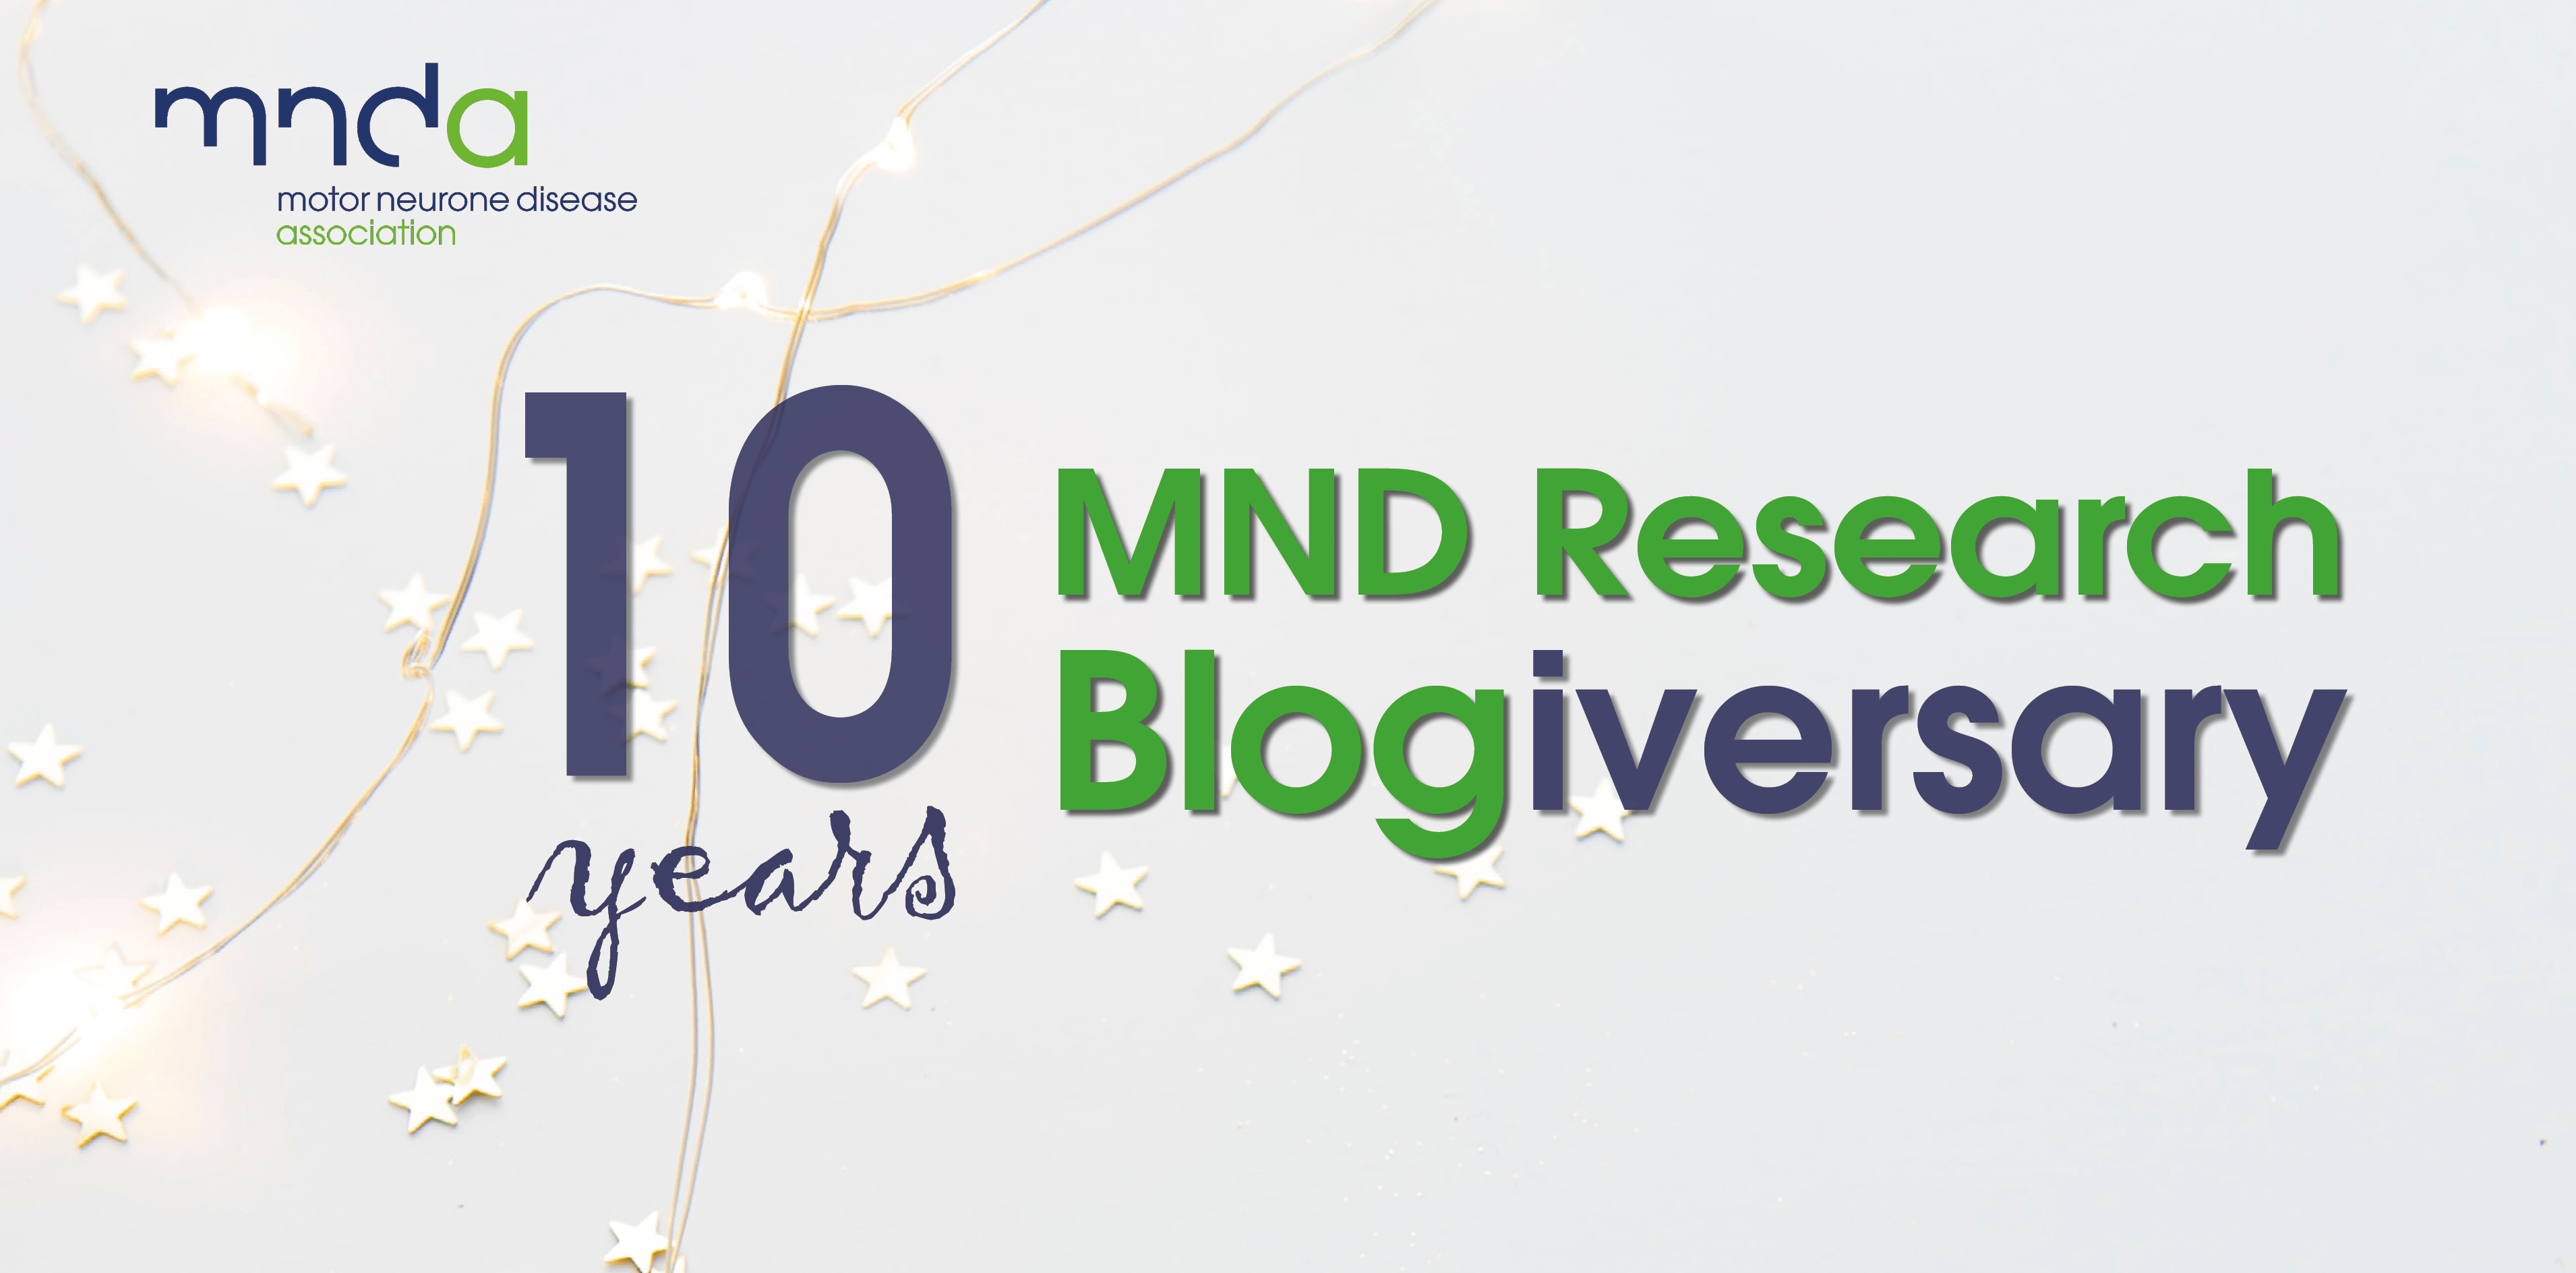 10 years of the MND Research Blog